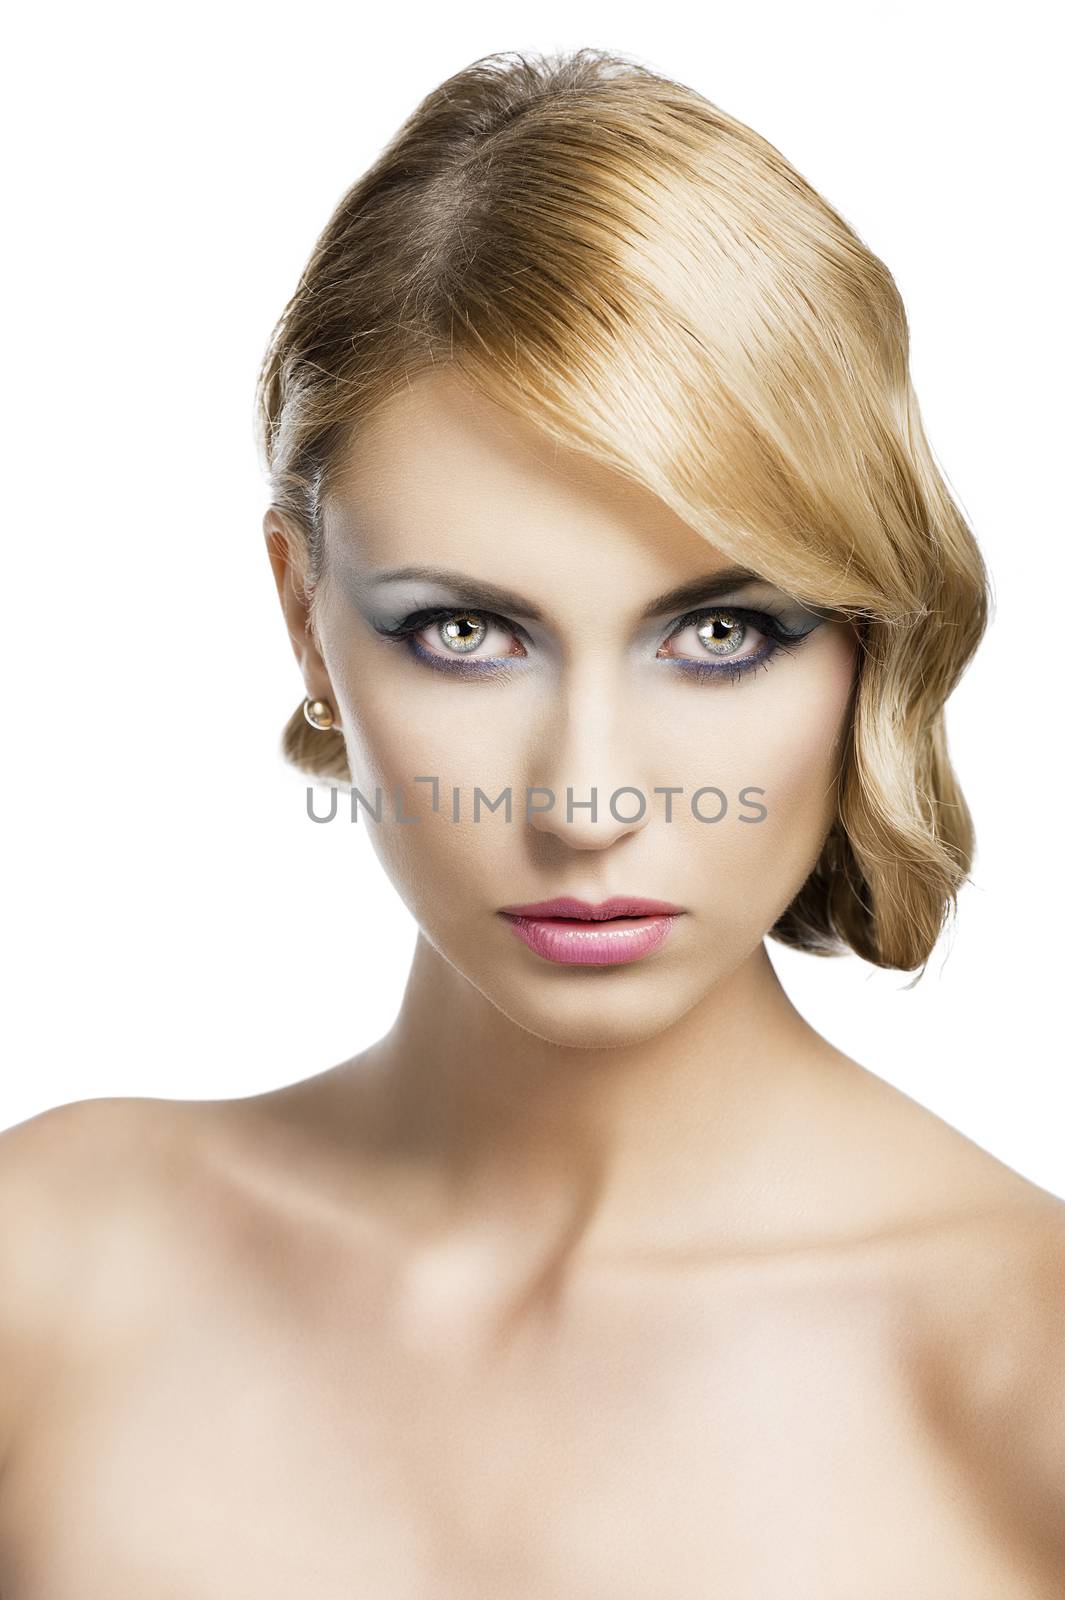 blond beautiful woman with strong make up and an old fashion hair stylish in beauty portrait close up, she is in front of the camera and looks in to the lens